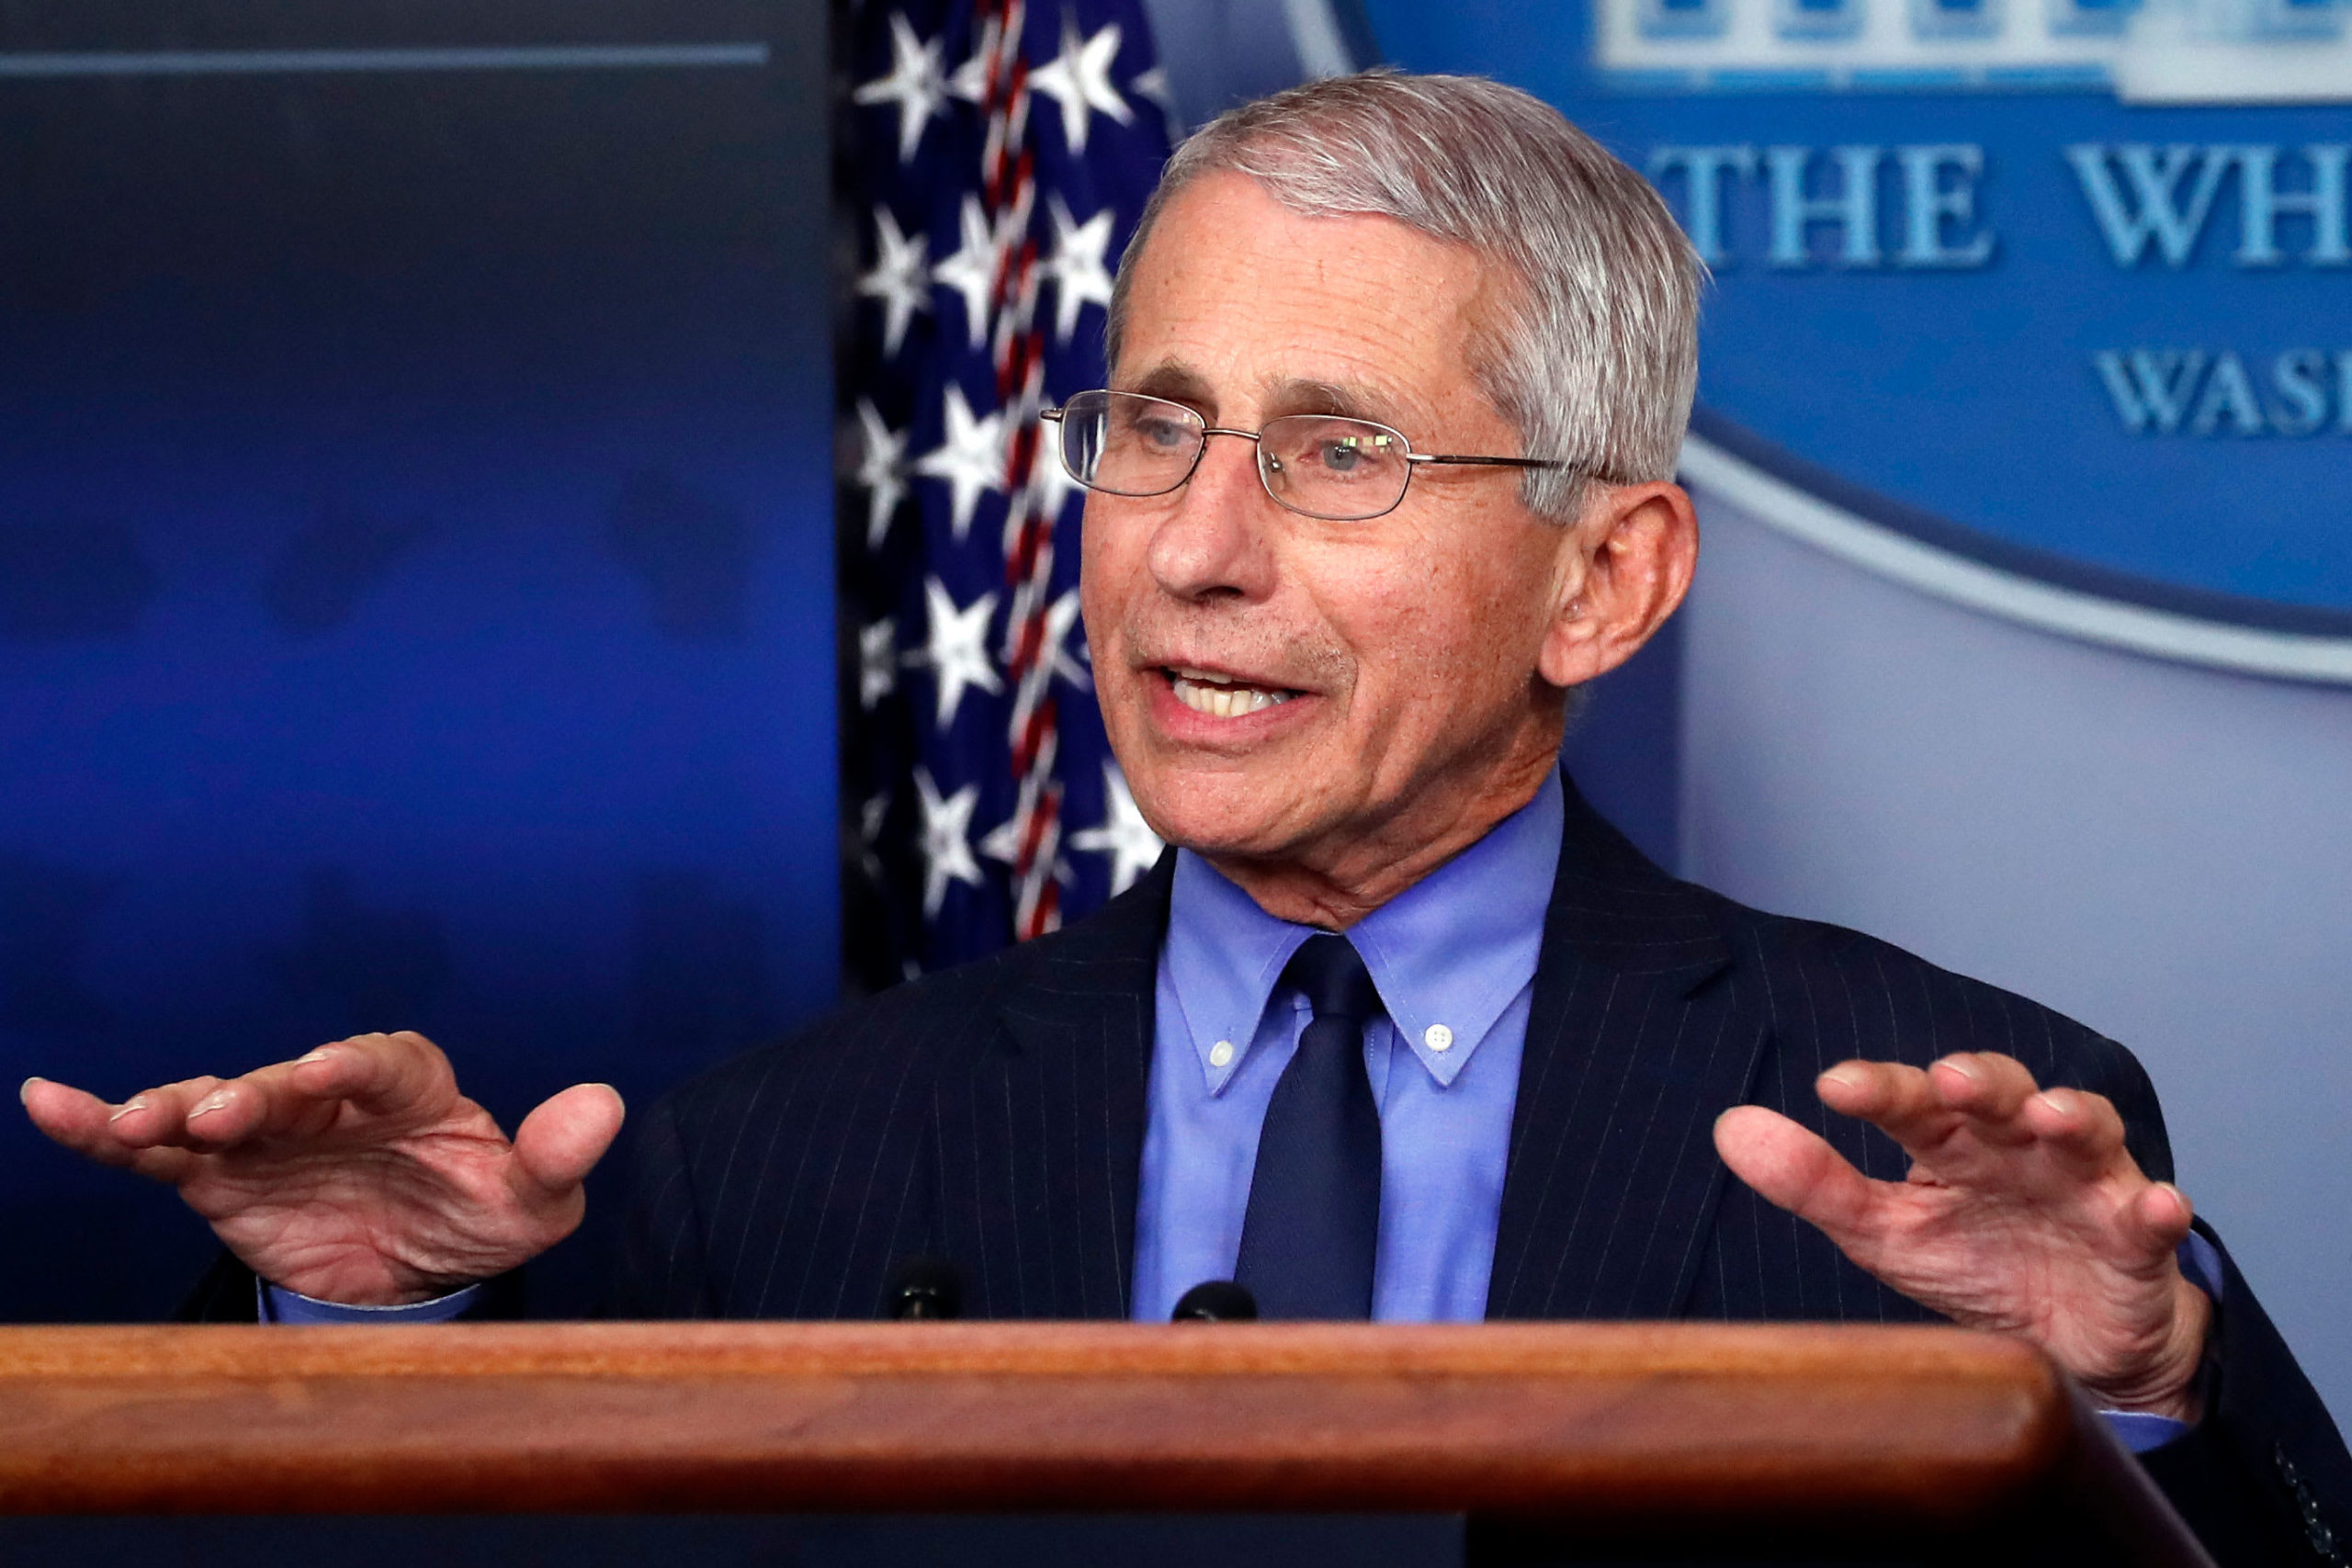 Dr. Anthony Fauci says Individuals who do not put on masks could ‘propagate the additional unfold of an infection’